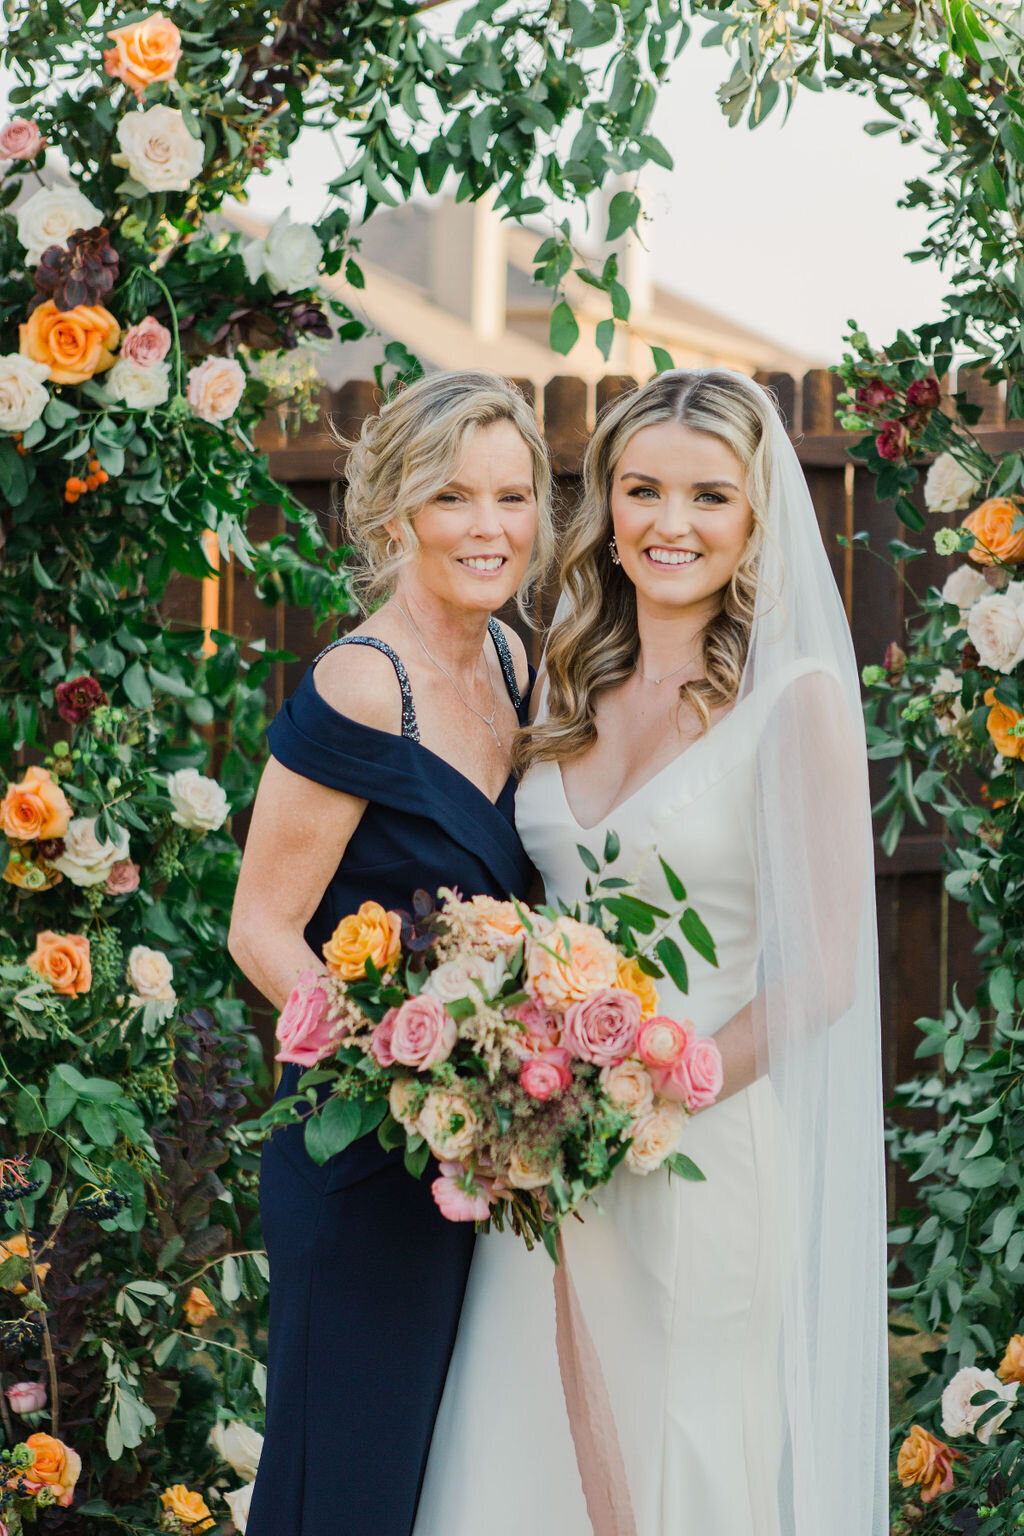 Portrait at Floral Arch by Vella Nest Floral, Best Florist in Dallas Fort Worth, Texas